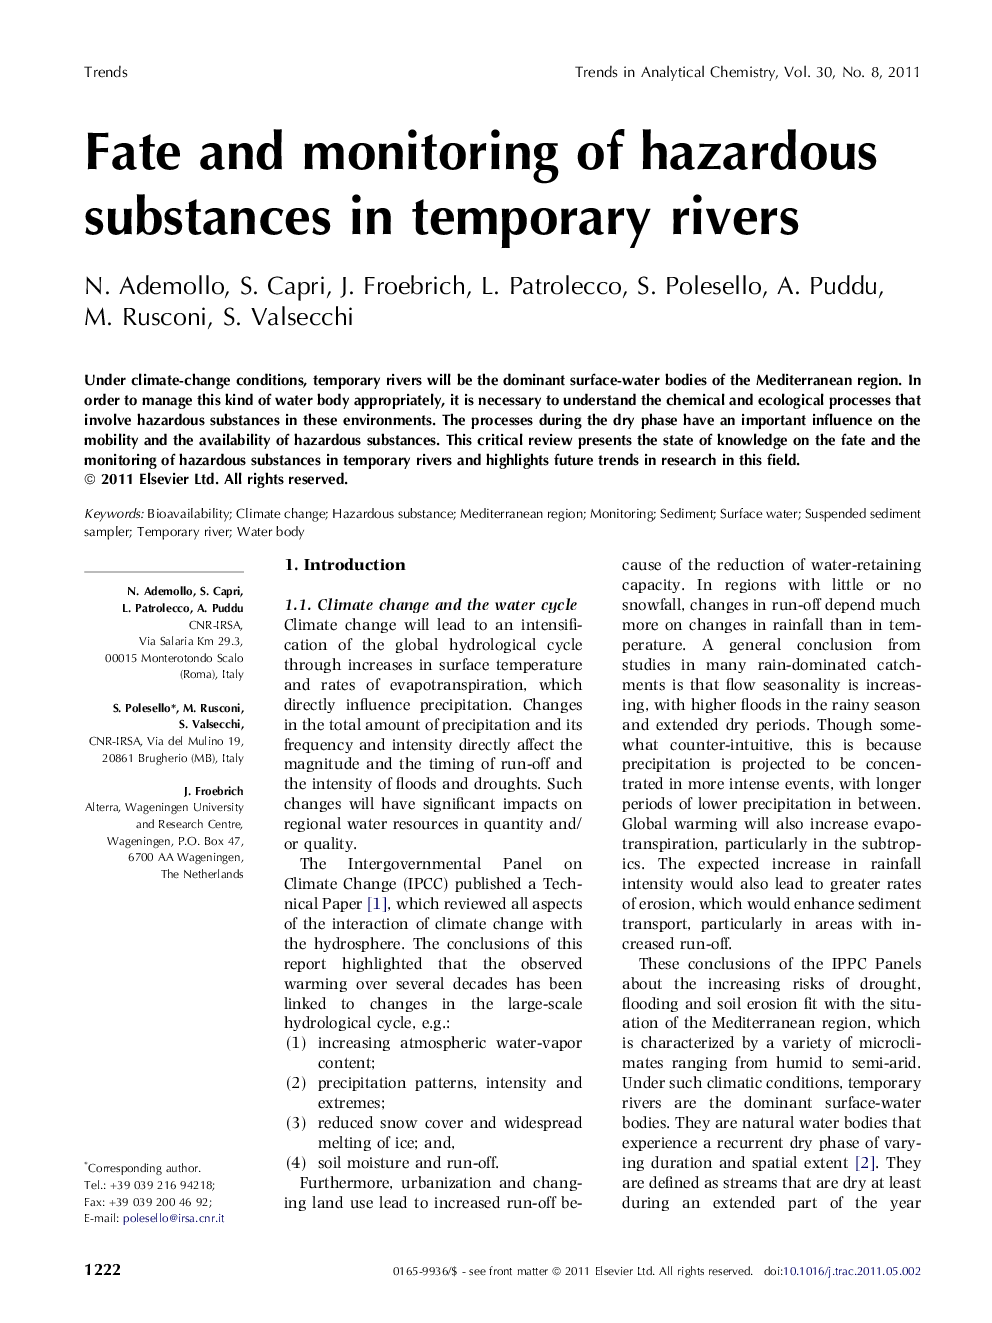 Fate and monitoring of hazardous substances in temporary rivers